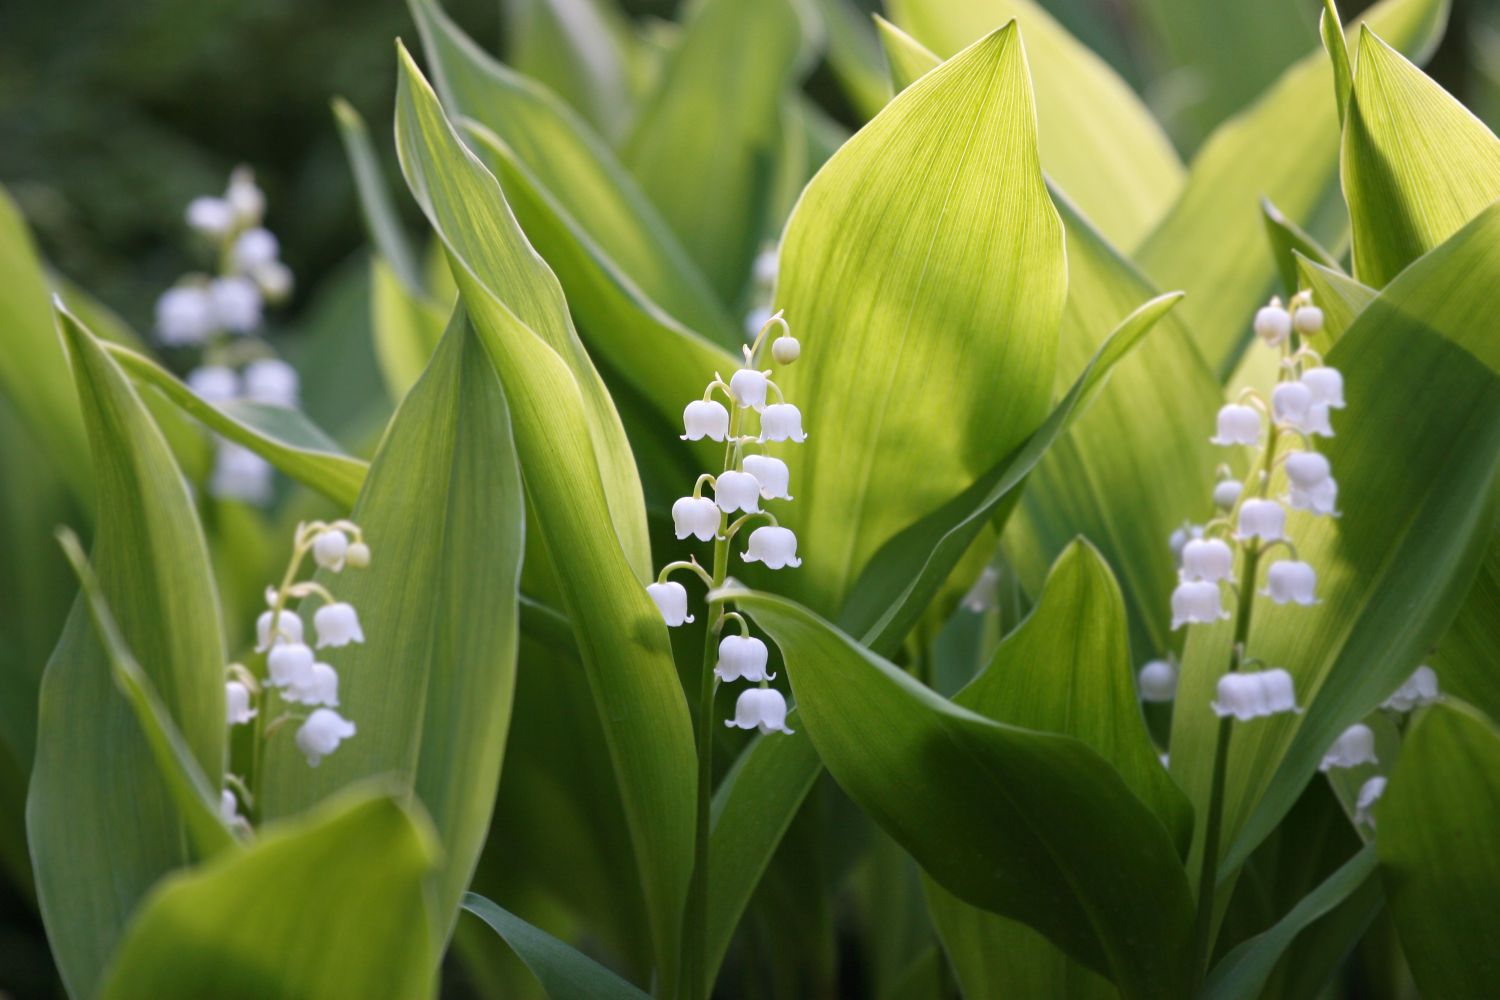 Buy Lily of the Valley Plants